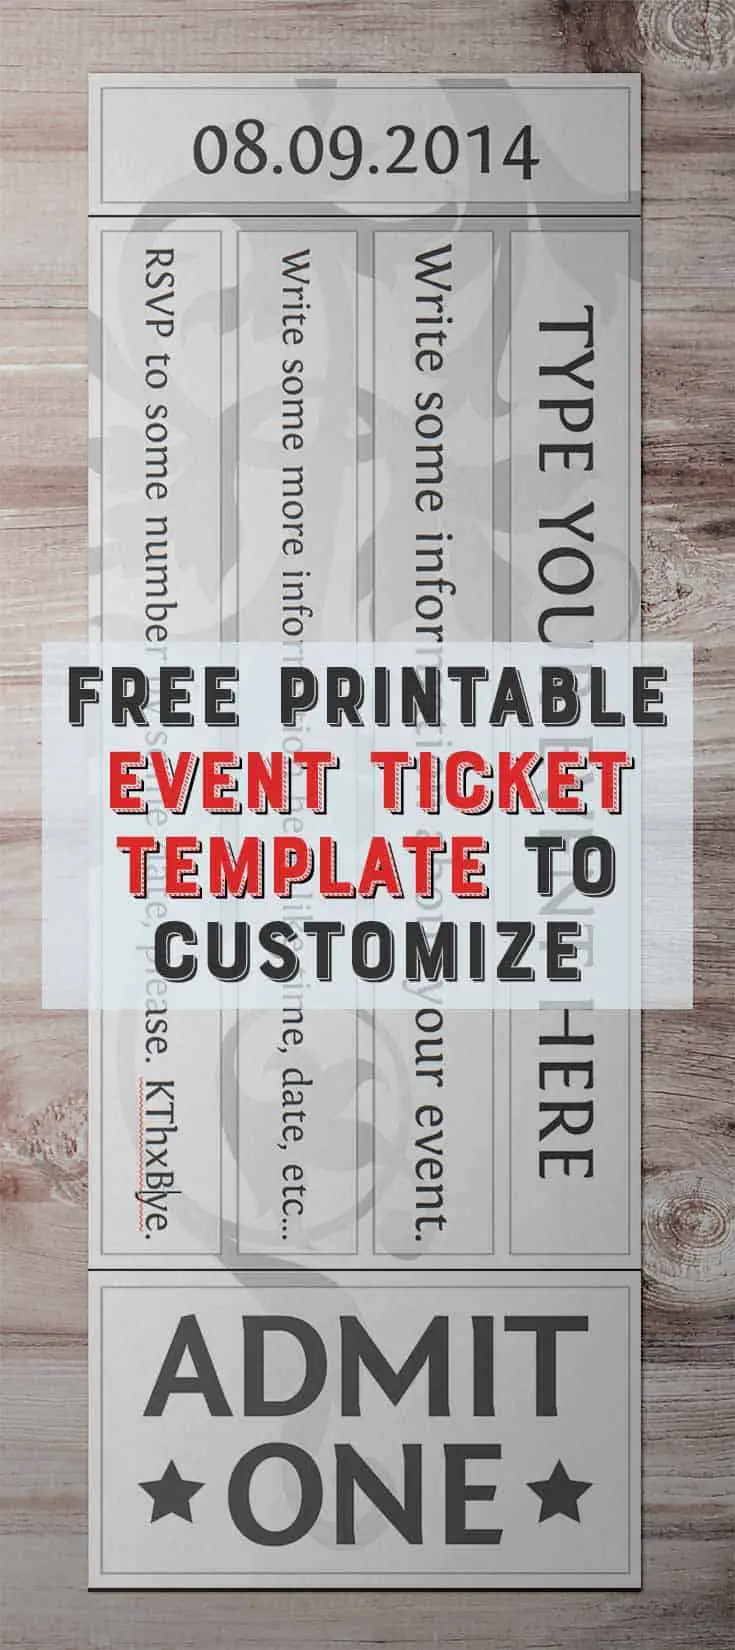 Ticket Layout Template Free from freeprintablesonline.com